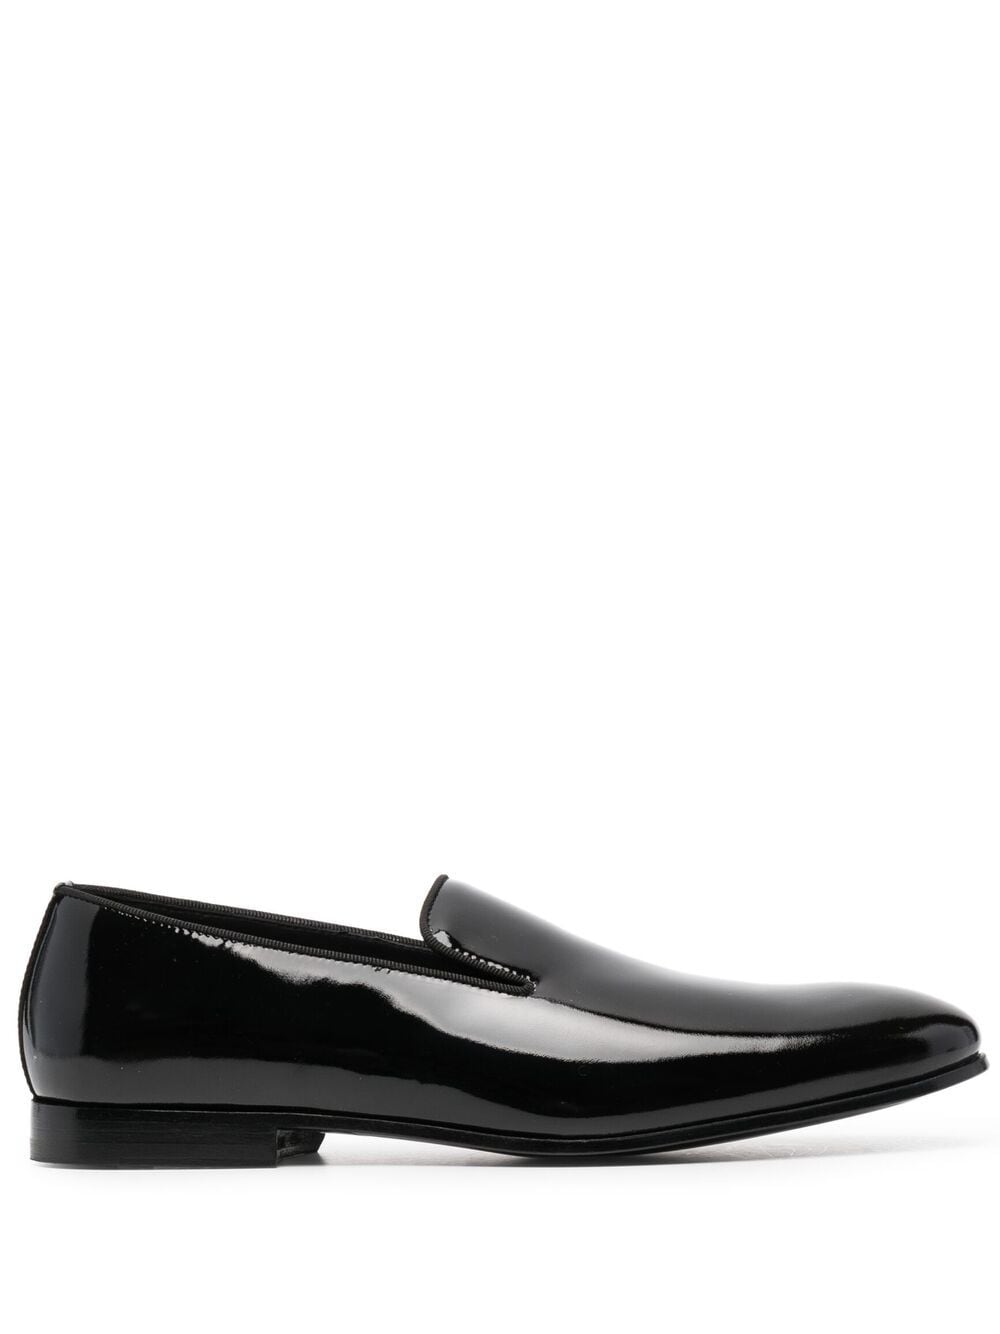 Doucal's patent leather loafers - Black von Doucal's